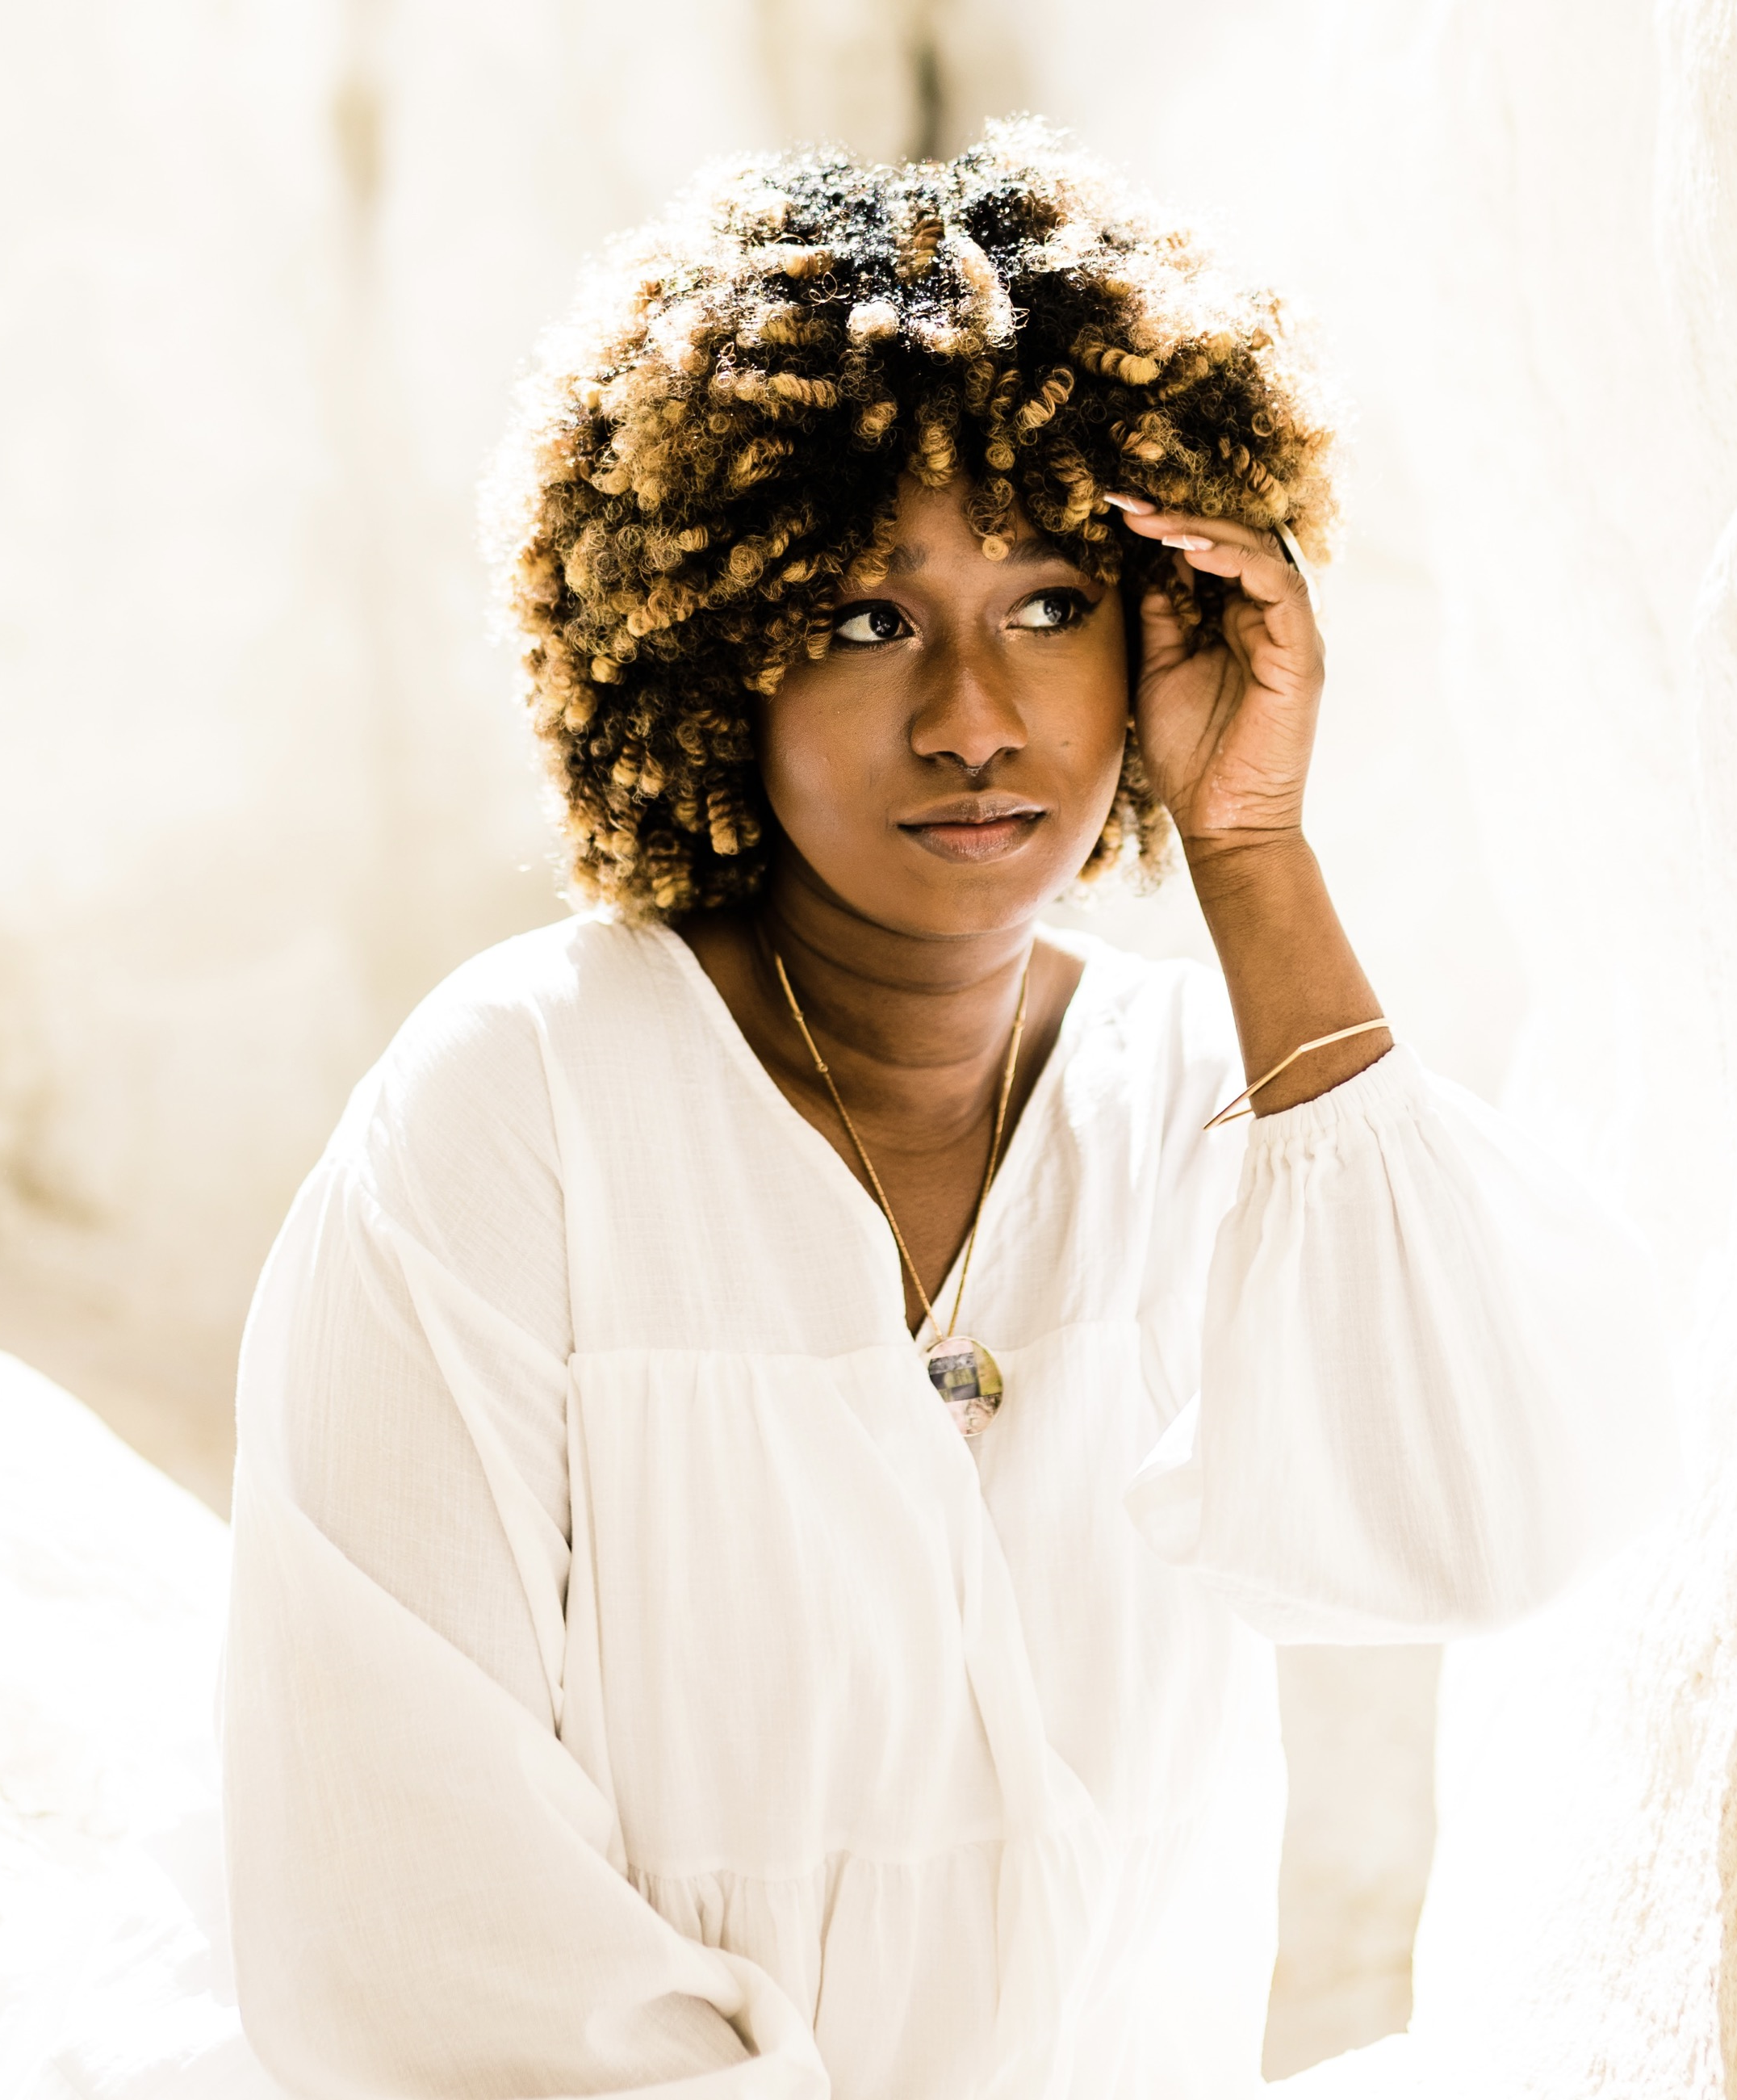 Irina Amouzou, a black femme person,  in a white shirt with a bright background